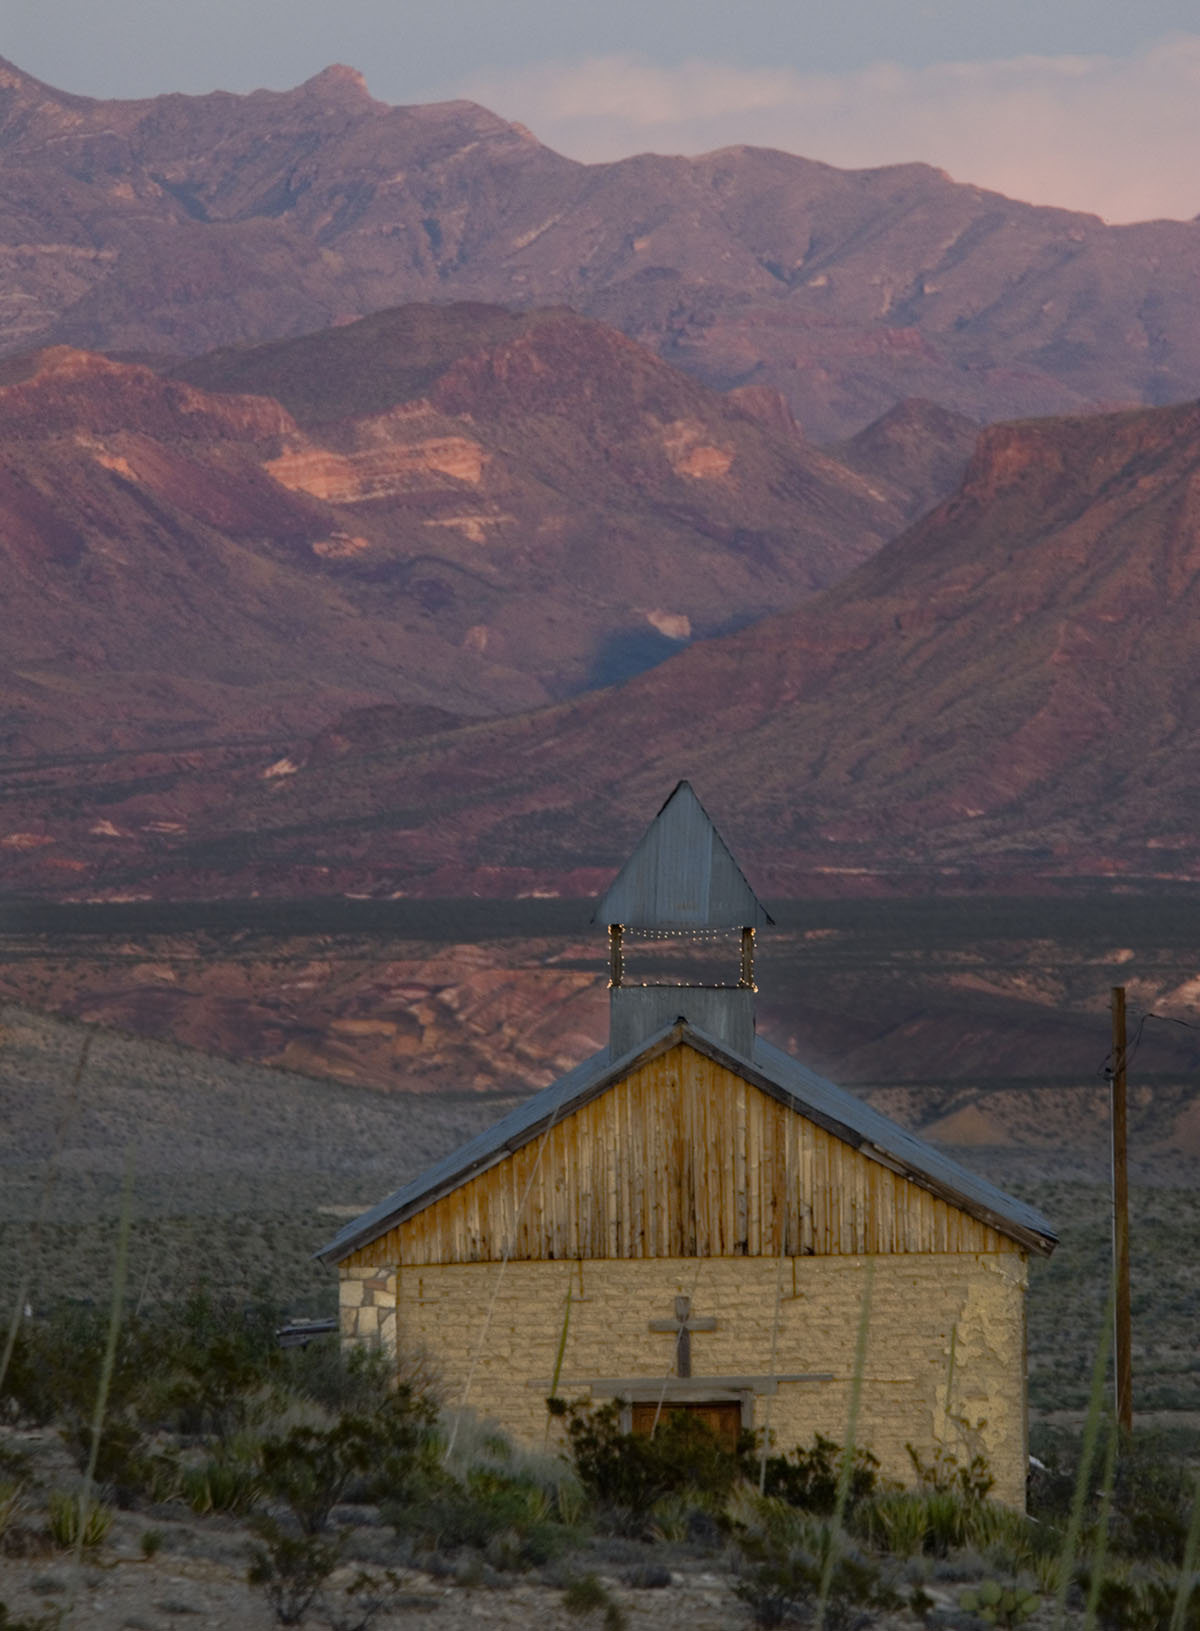 A small abandoned church sits at the base of sweeping red and brown rock mountains